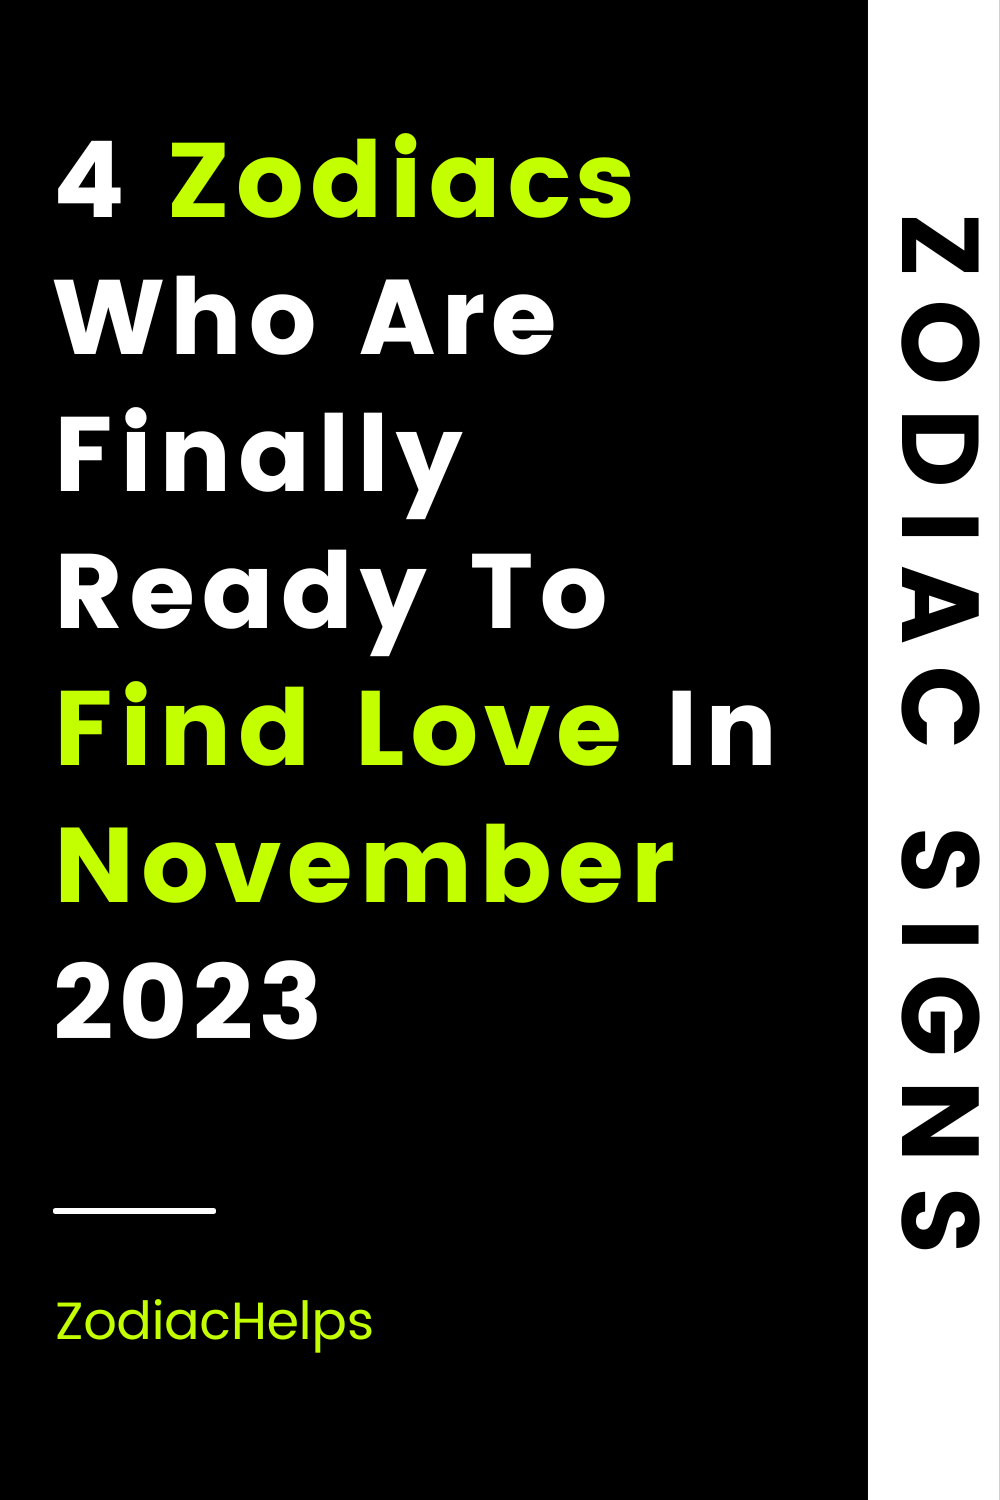 4 Zodiacs Who Are Finally Ready To Find Love In November 2023